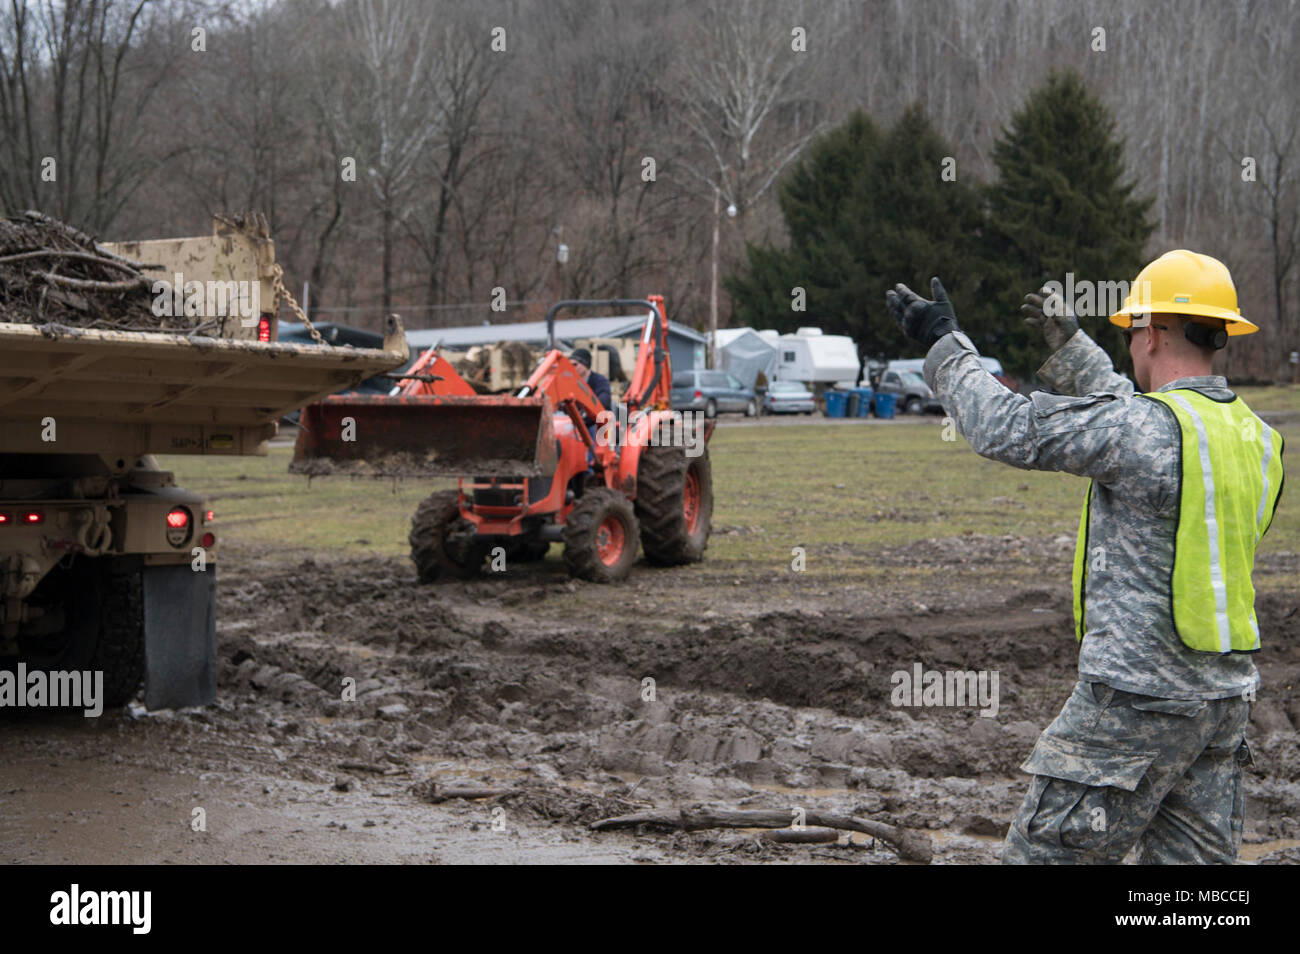 Staff Sgt. Kevin Smith, a combat engineer and non-commissioned officer in charge for the 119th Sapper Engineer Company, West Virginia National Guard, directs a truck loaded with debris in Ohio County, West Virginia Feb. 19, 2018, following flooding that impacted the area. WVNG Soldiers provided equipment for small and large debris removal and helped local residents and city crews to remove more than 128 tons of debris from the area. (U.S. Air National Guard Stock Photo